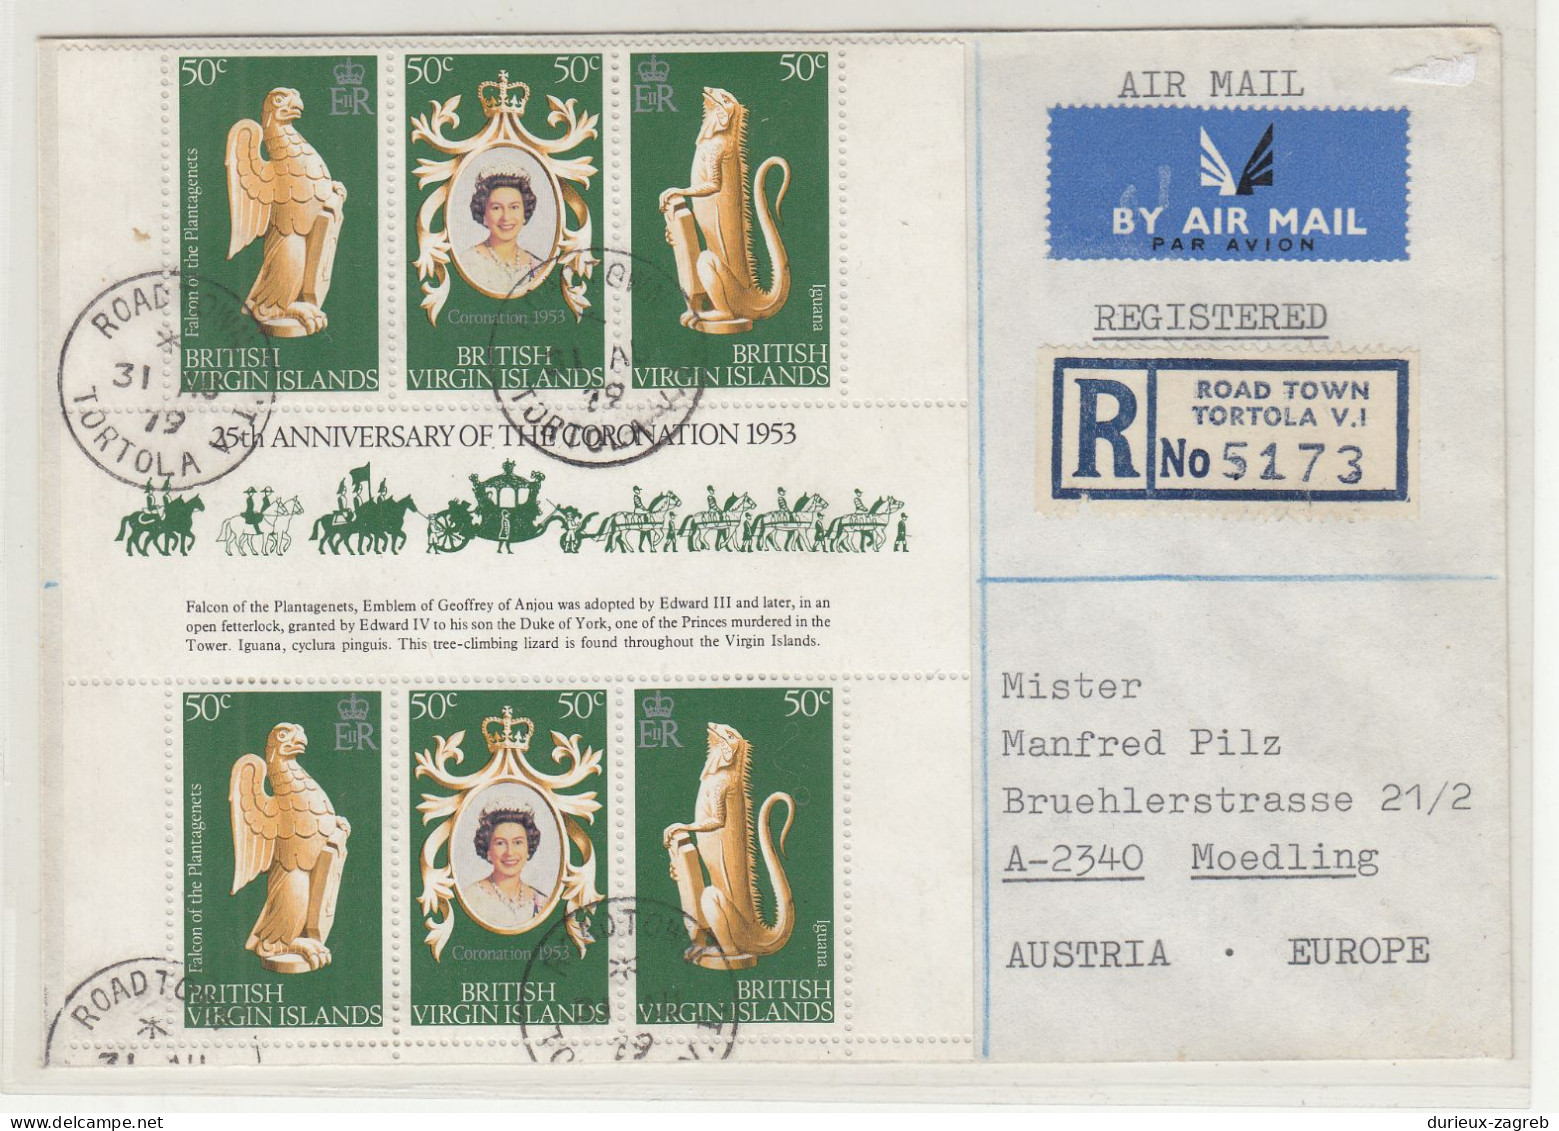 British Virgin Islands Letter Cover Posted Registered 1979 Road Town Tortola To Modling B240401 - Iles Vièrges Britanniques